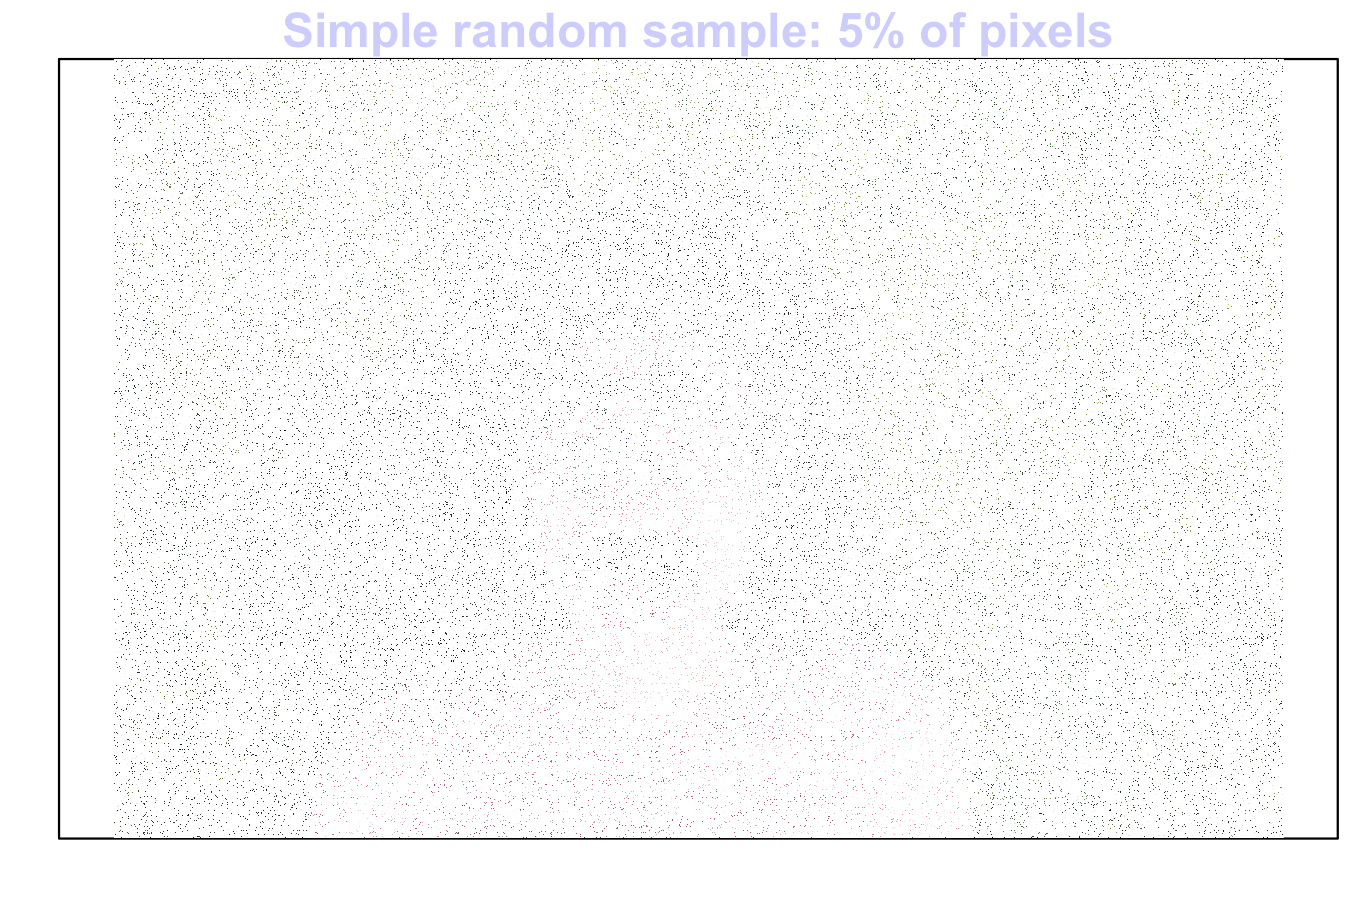 Random samples from an image: 5 percent of pixels (top left); 10 percentof pixels (top right); 25 percent of pixels (bottom left); 50 percent of pixels (bottom right)